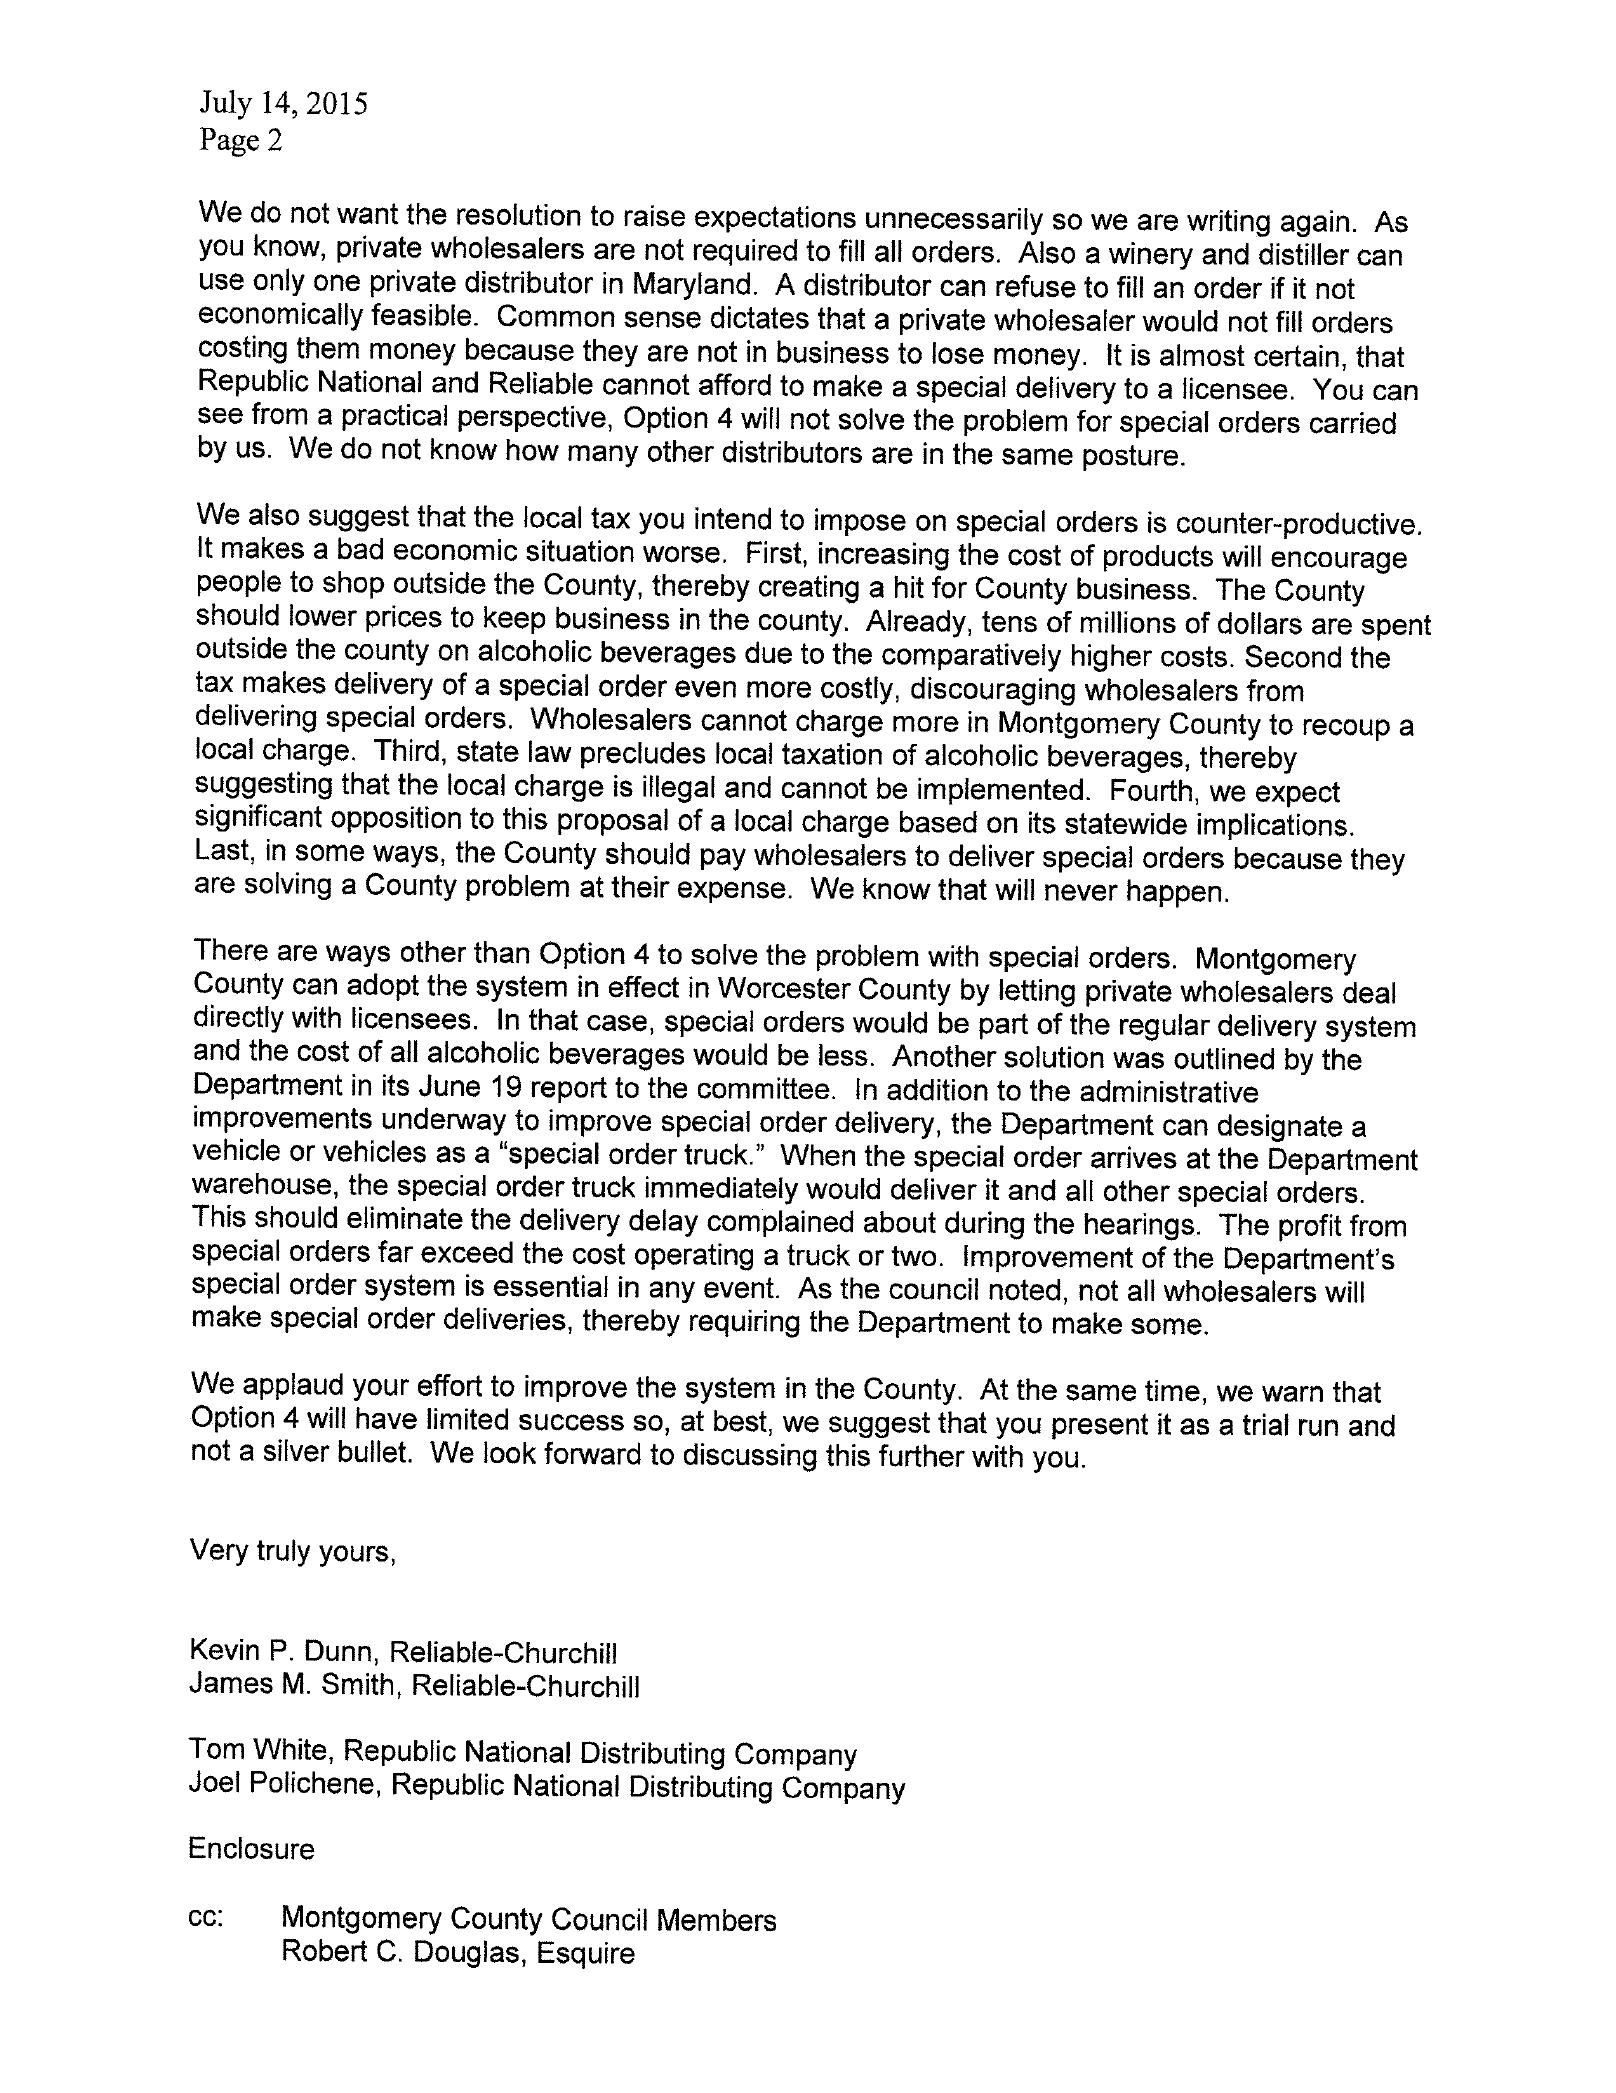 Wholesalers Letter to Council 2